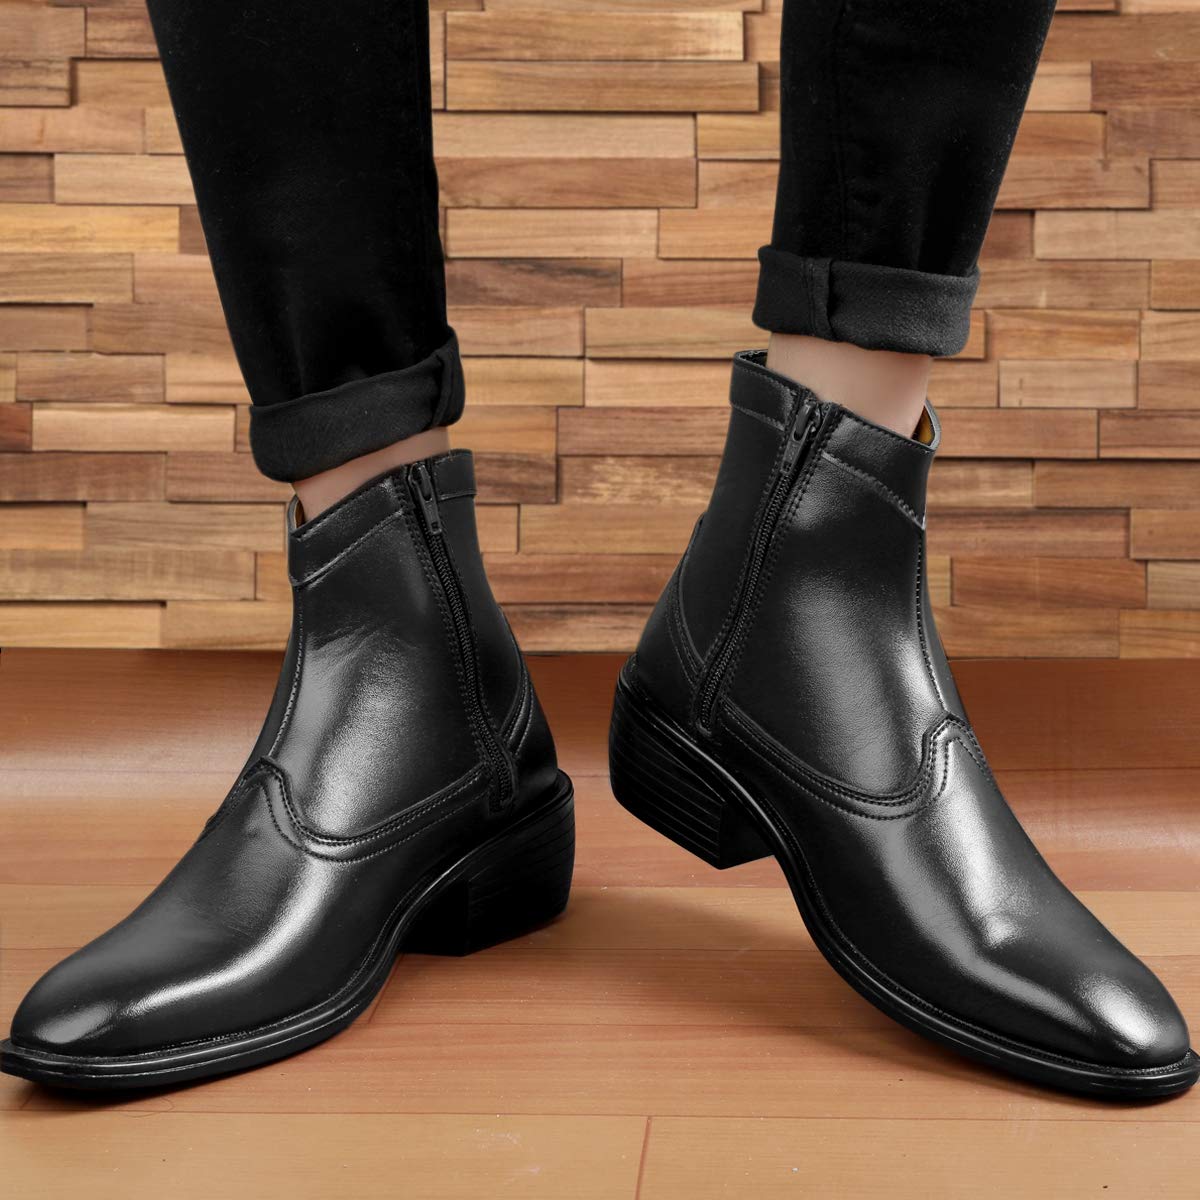 Classy High Ankle Black Casual And Formal Boot With Zip Pattern-Unique and Classy